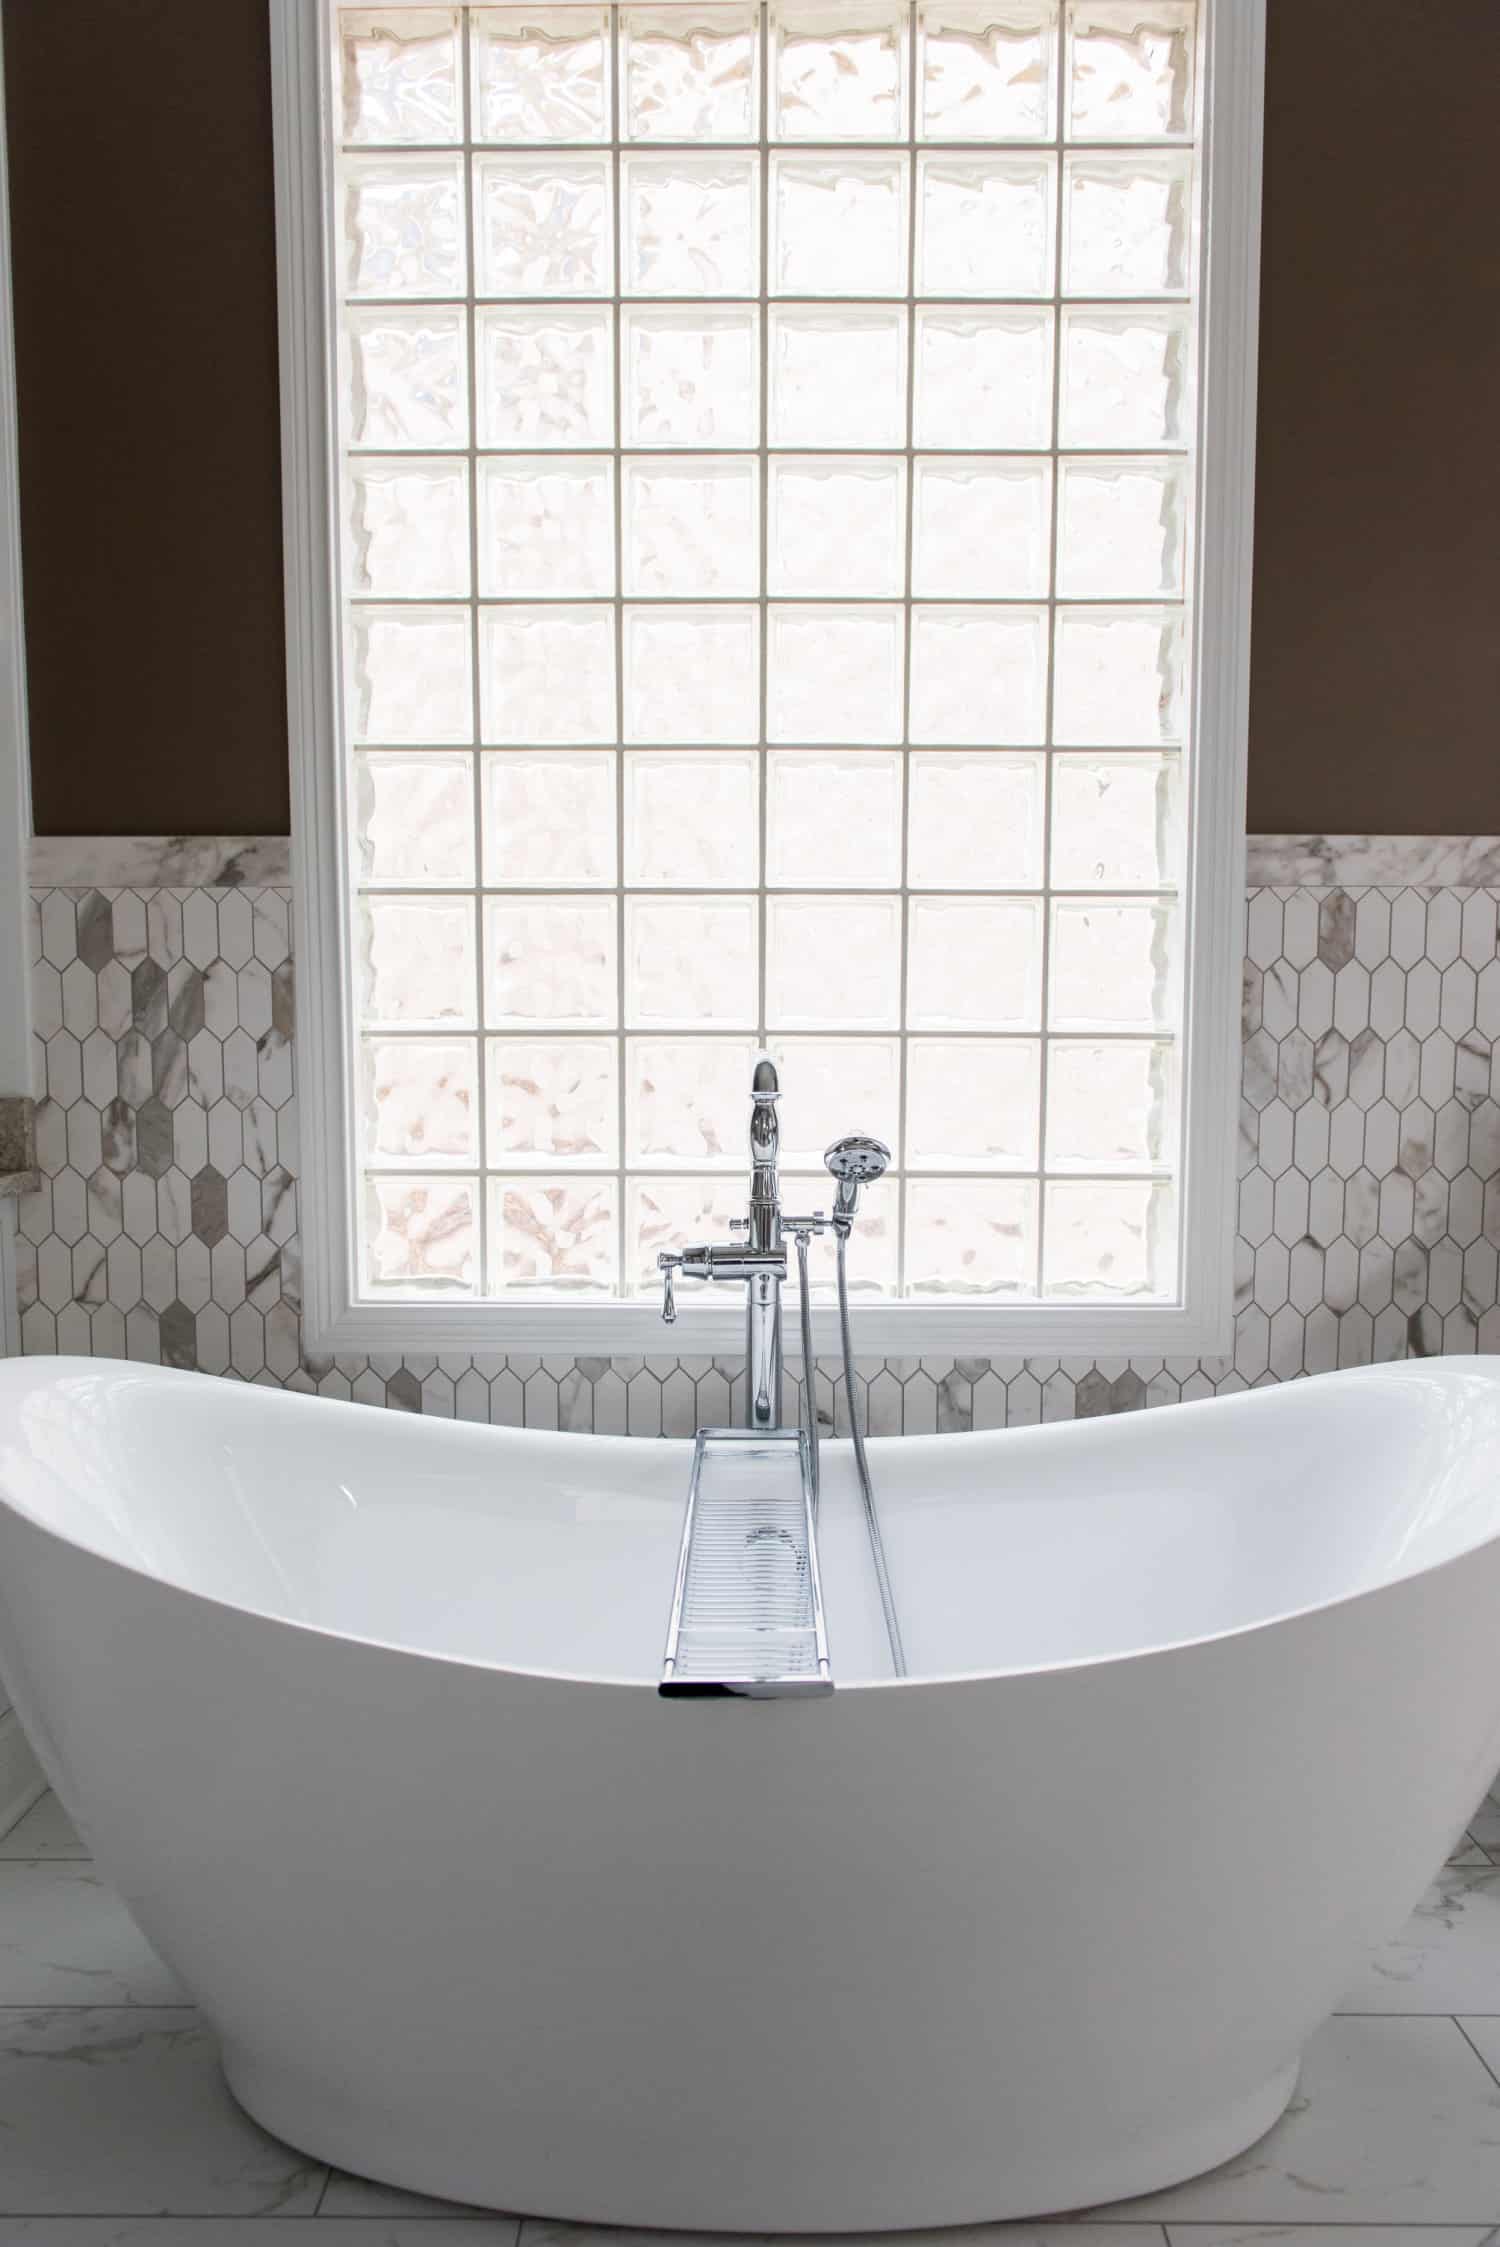 Nicholas Design Build | A white bathtub in a tranquil bathroom oasis with brown tile and a window.